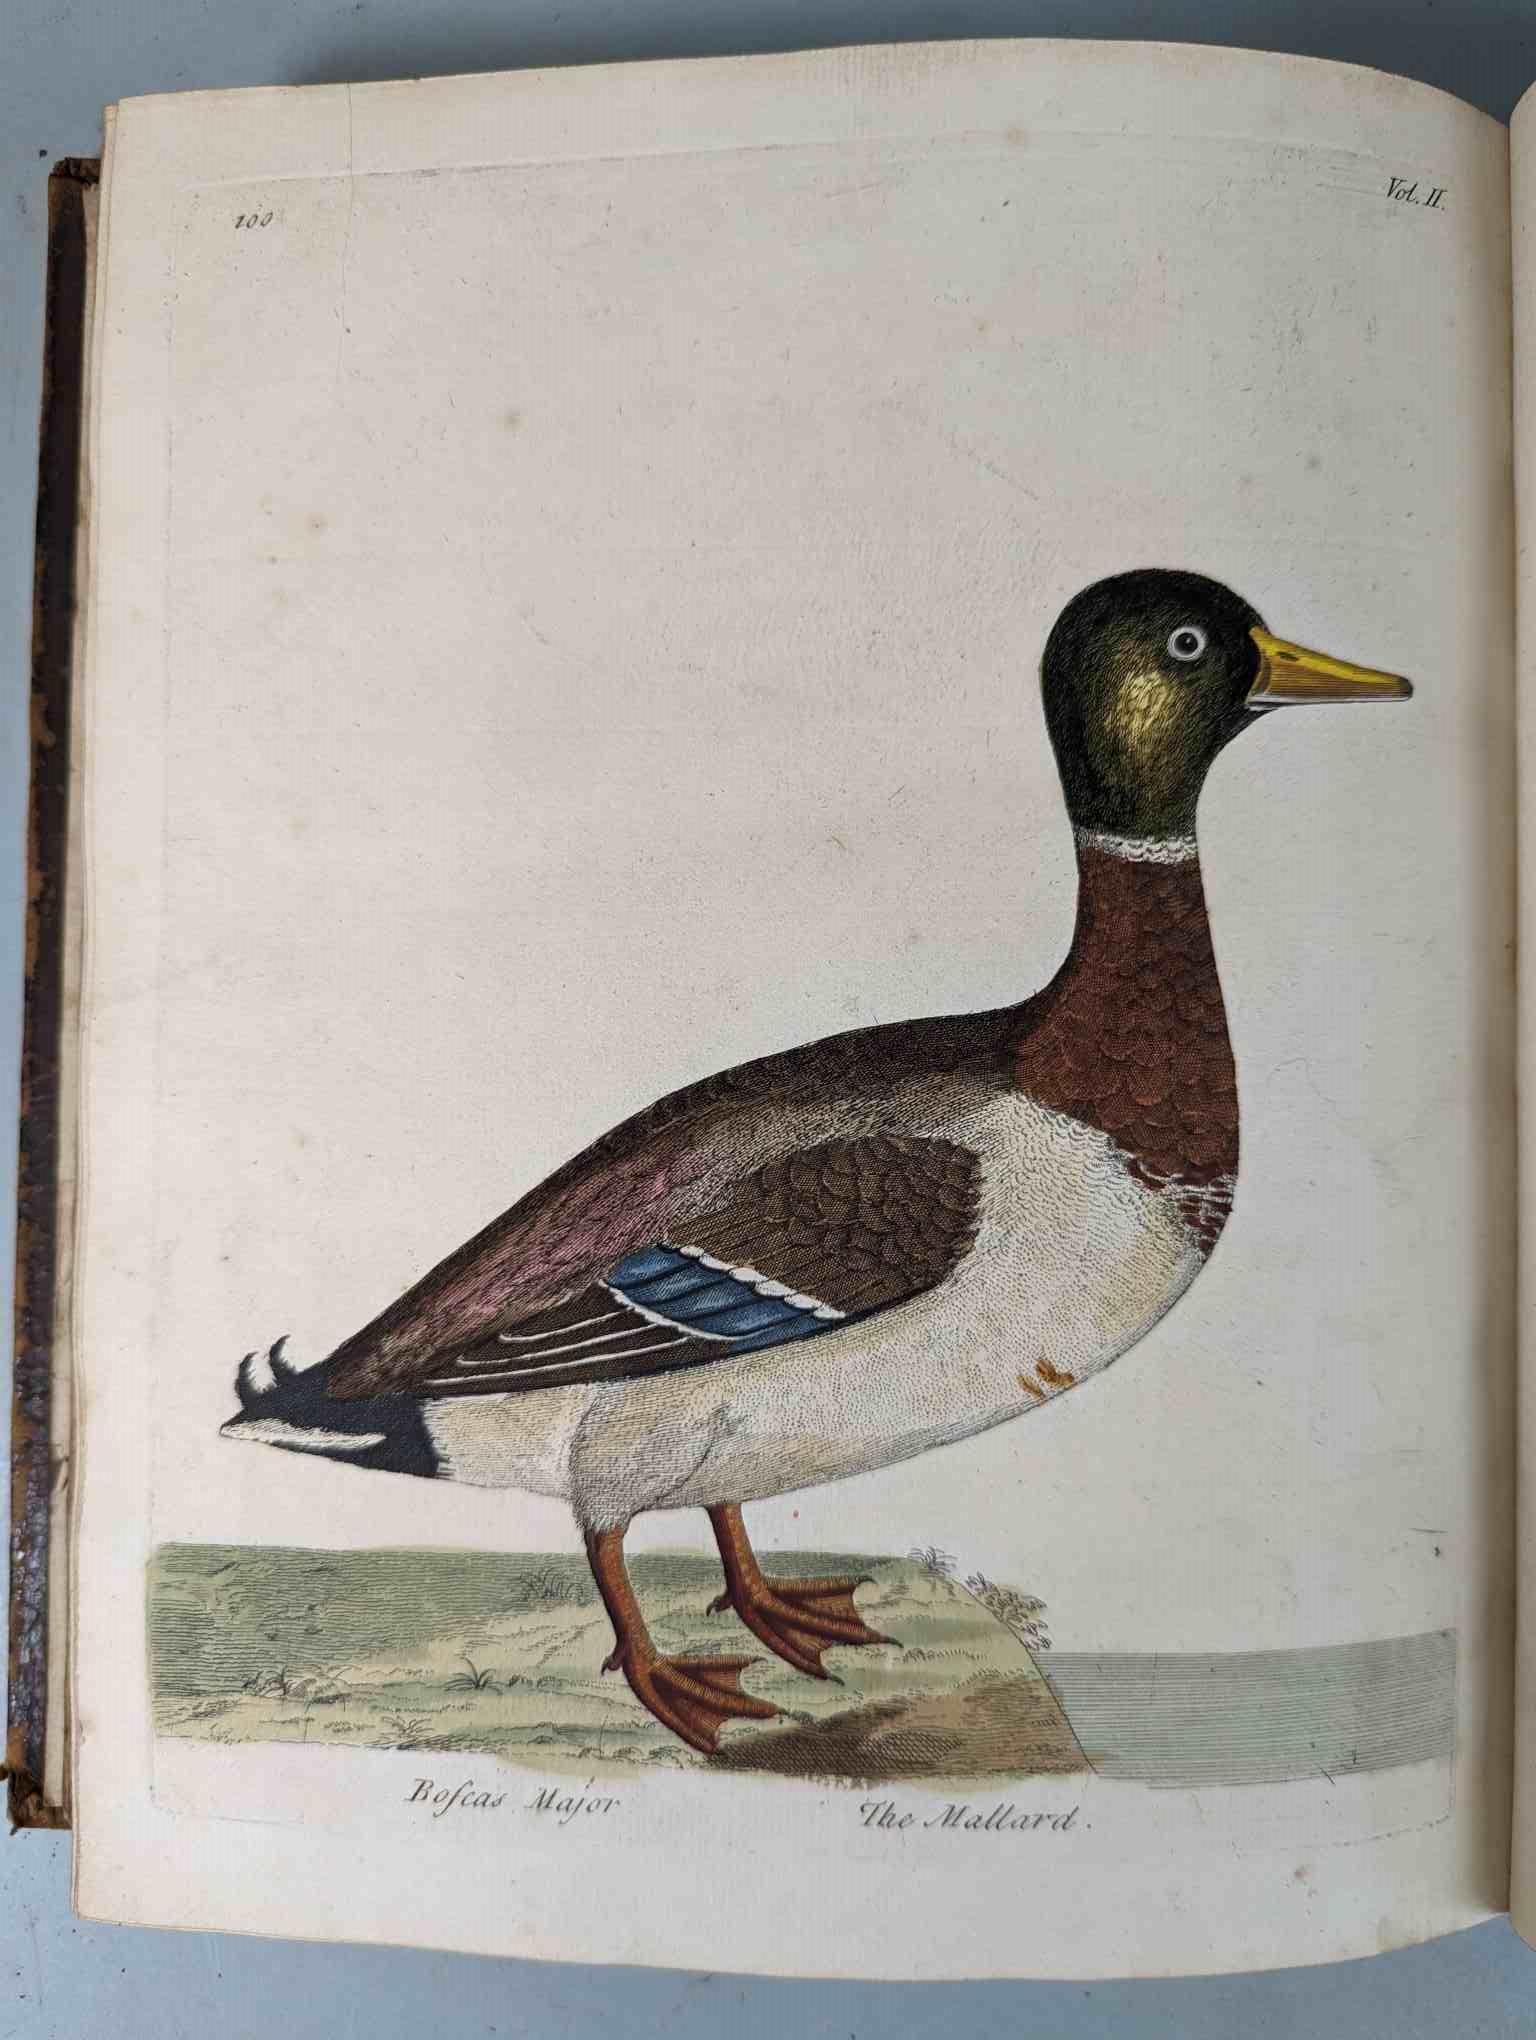 ALBIN, Eleazar. A Natural History of Birds, to which are added, Notes and Observations by W. - Image 204 of 208